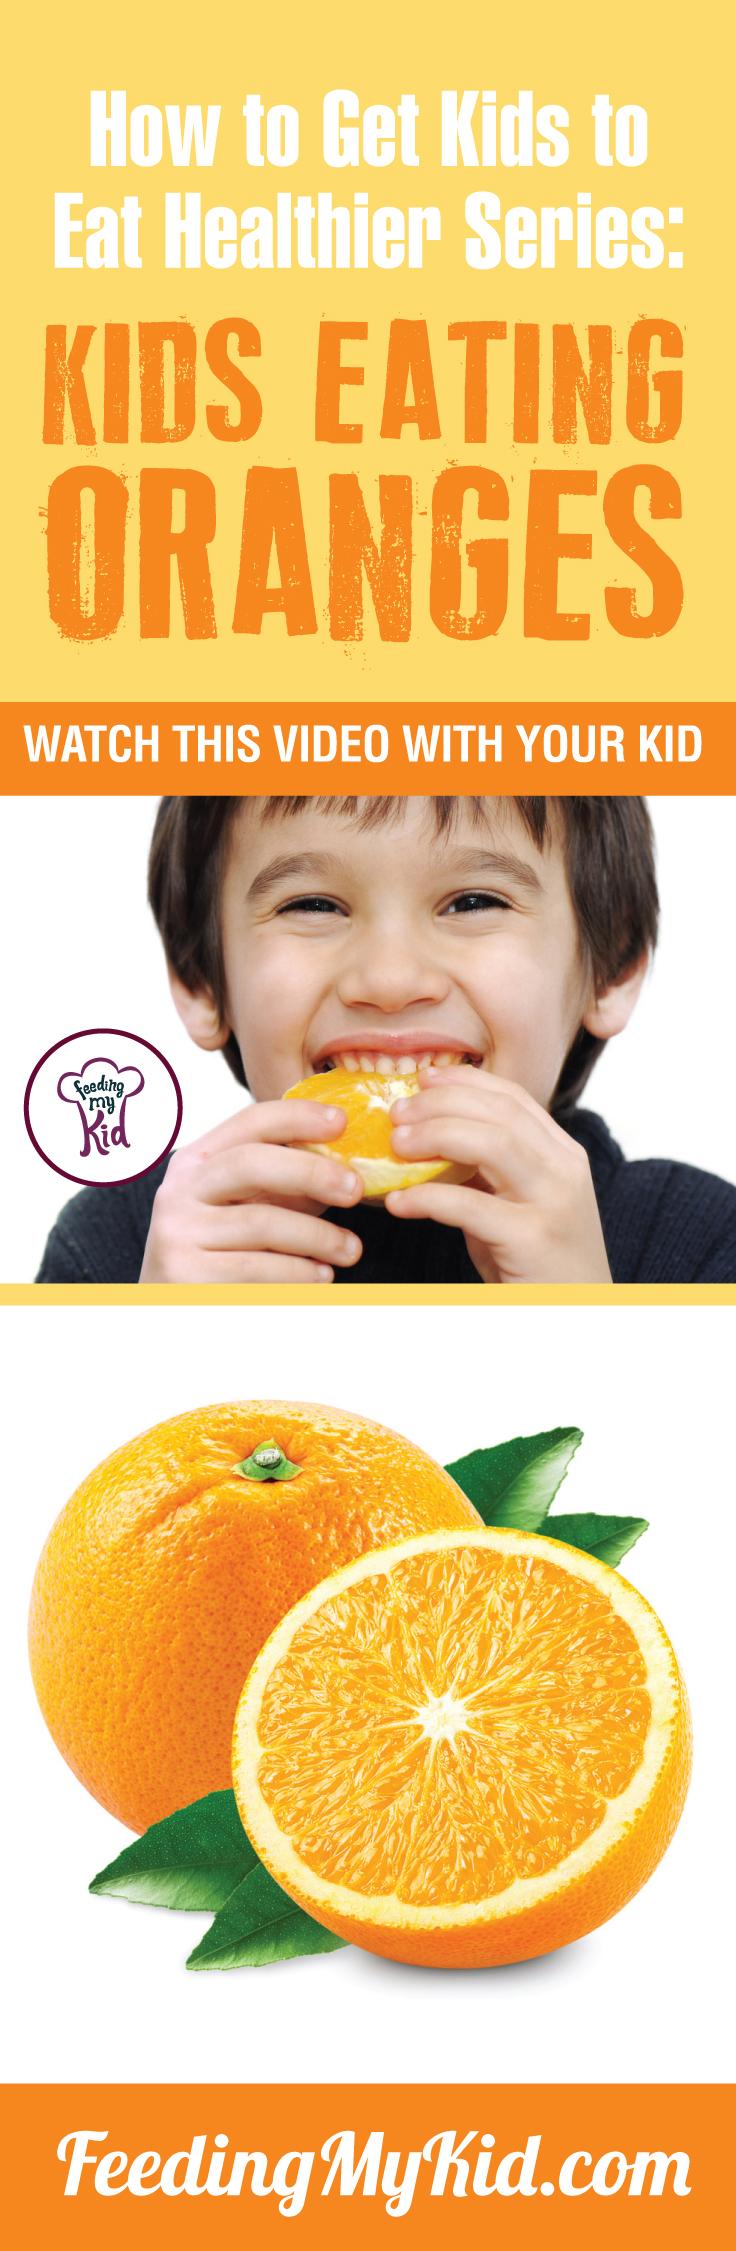 Watch these videos with your kids of kids eating veggies and fruits and get your kids to eat veggies and fruits. Find out how it works here. Feeding My Kid is a filled with all the information you need about how to raise your kids, from healthy tips to nutritious recipes. #pickyeating #getkidstoeat